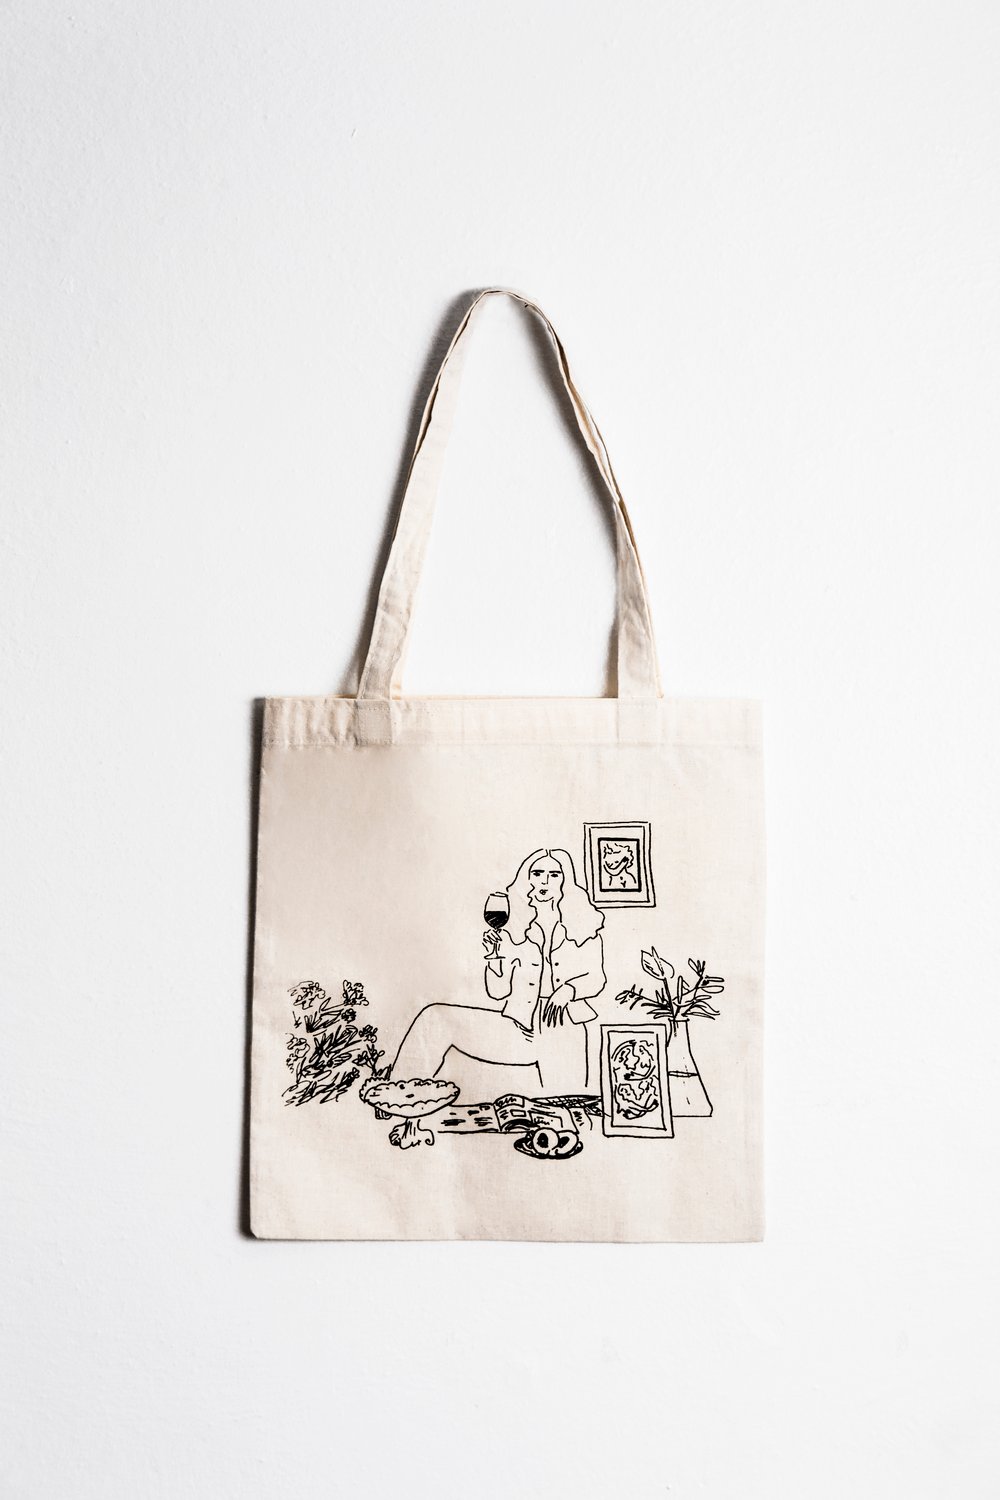 Image of 'Adios' signed tote bag (Limited)